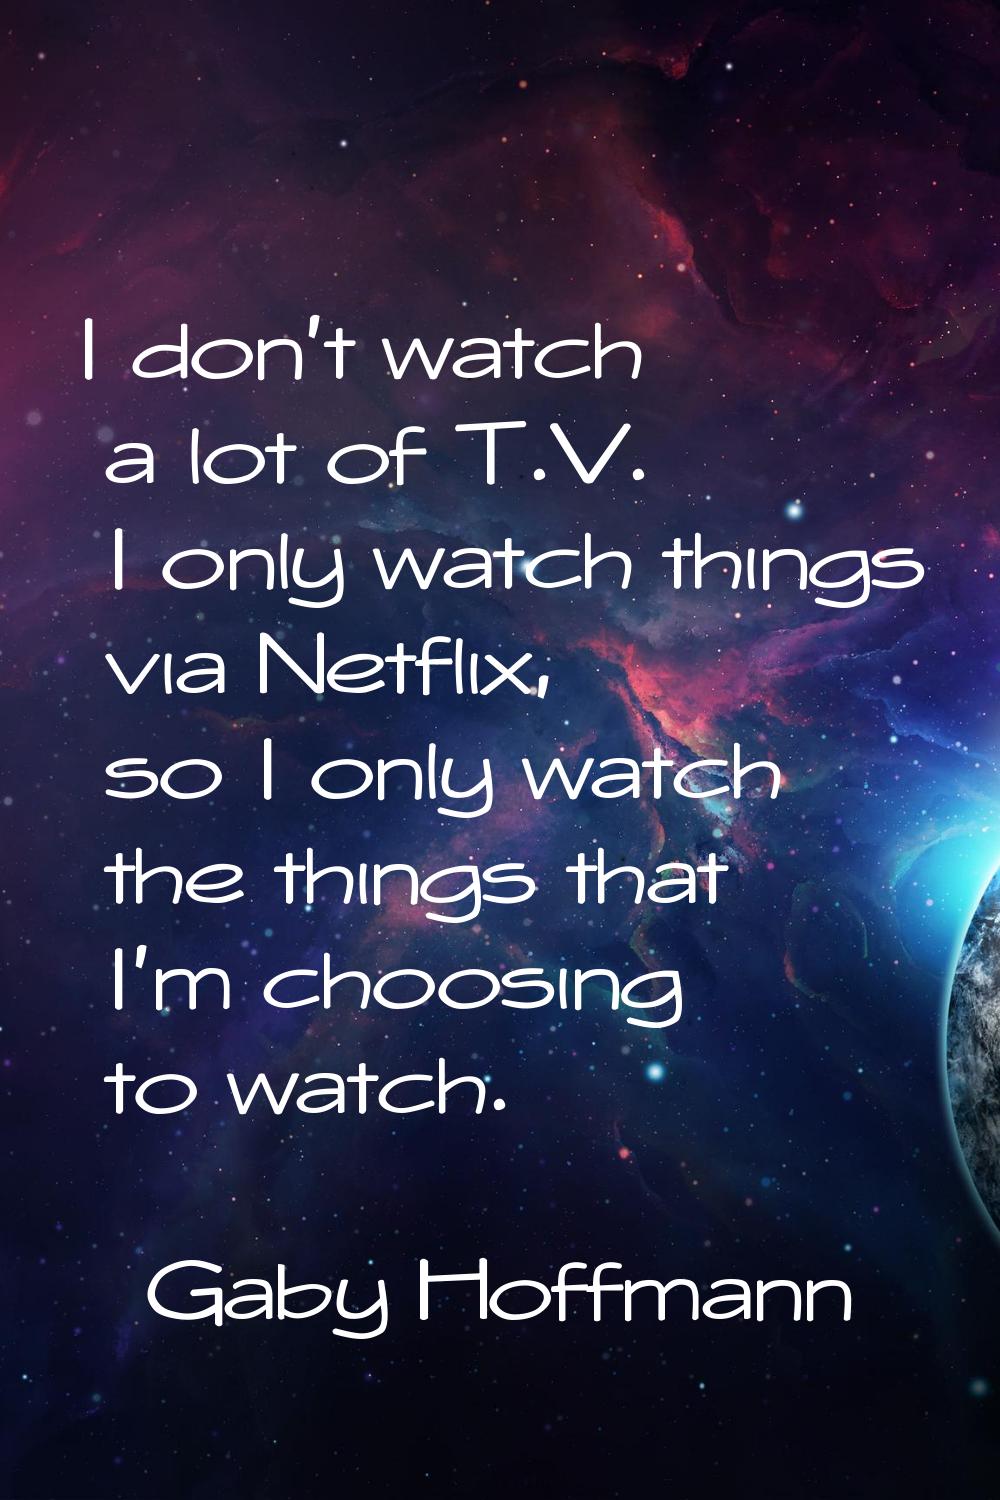 I don't watch a lot of T.V. I only watch things via Netflix, so I only watch the things that I'm ch